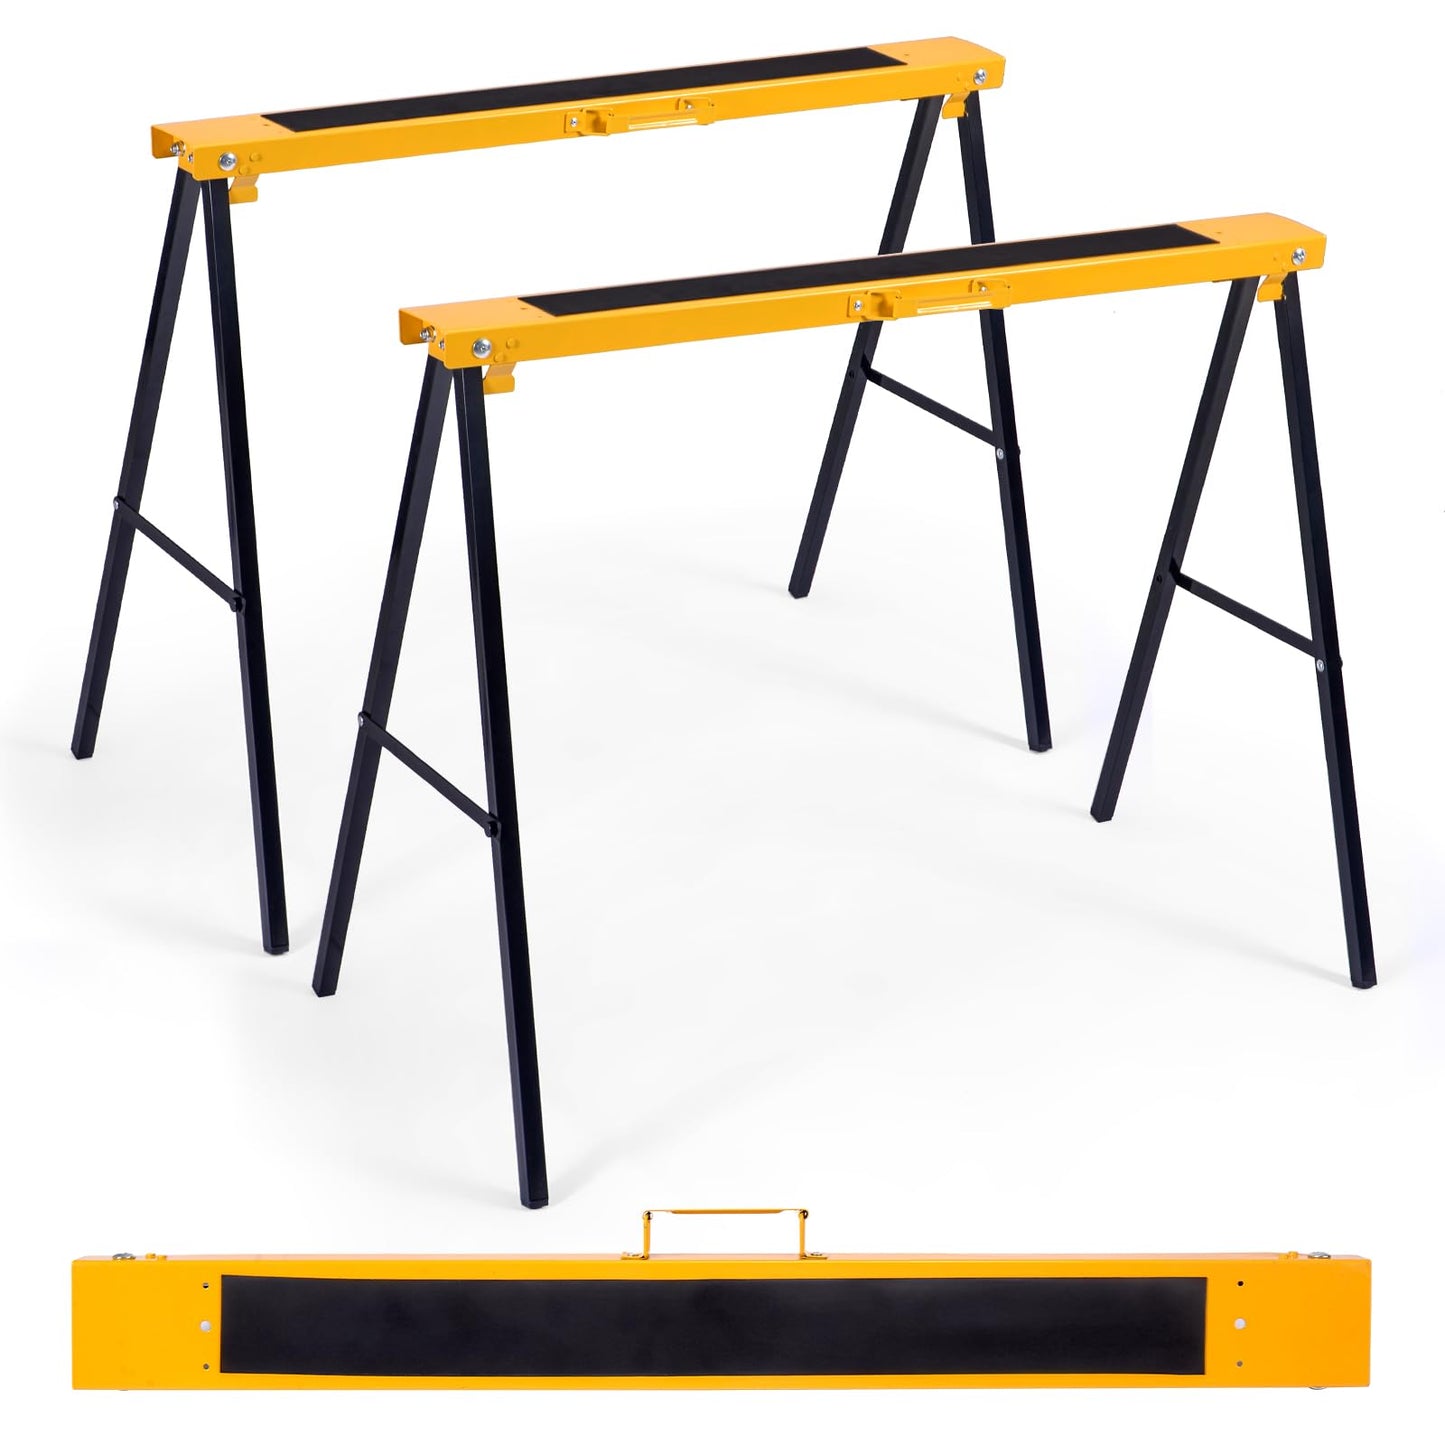 Goplus Saw Horses 2 Pack Folding, Portable Sawhorse with Fast Open Legs, Convenient Handle. Heavy Duty Steel Sawhorse for Woodworking, Carpenters,